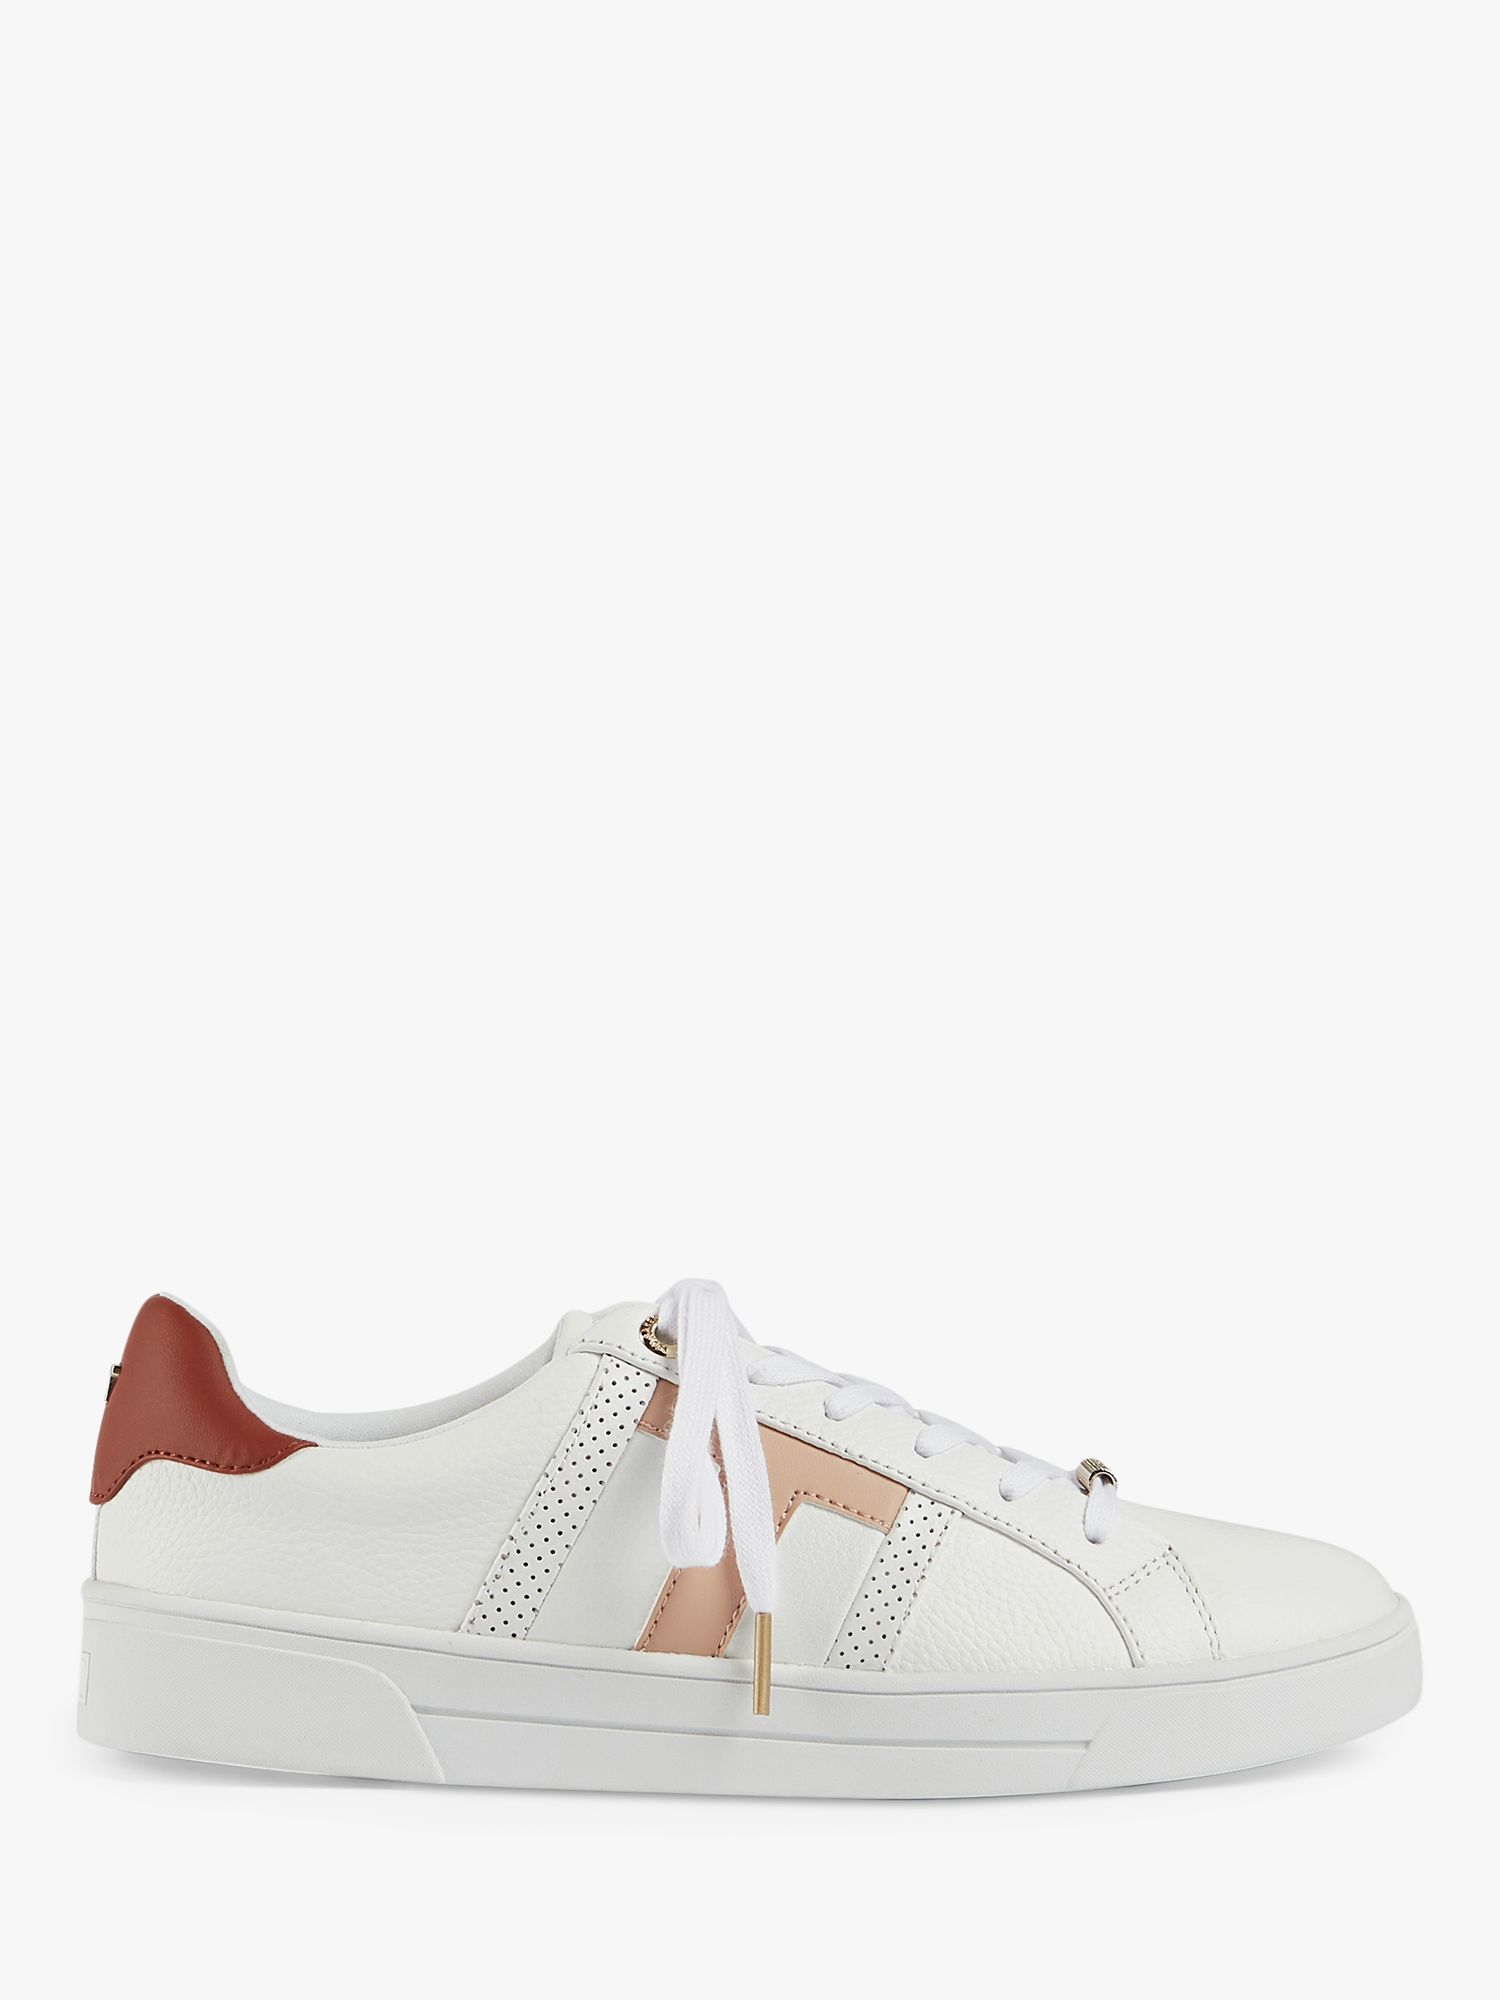 Ted Baker Ottoli Tedah Leather Perforated T Detail Trainers, White